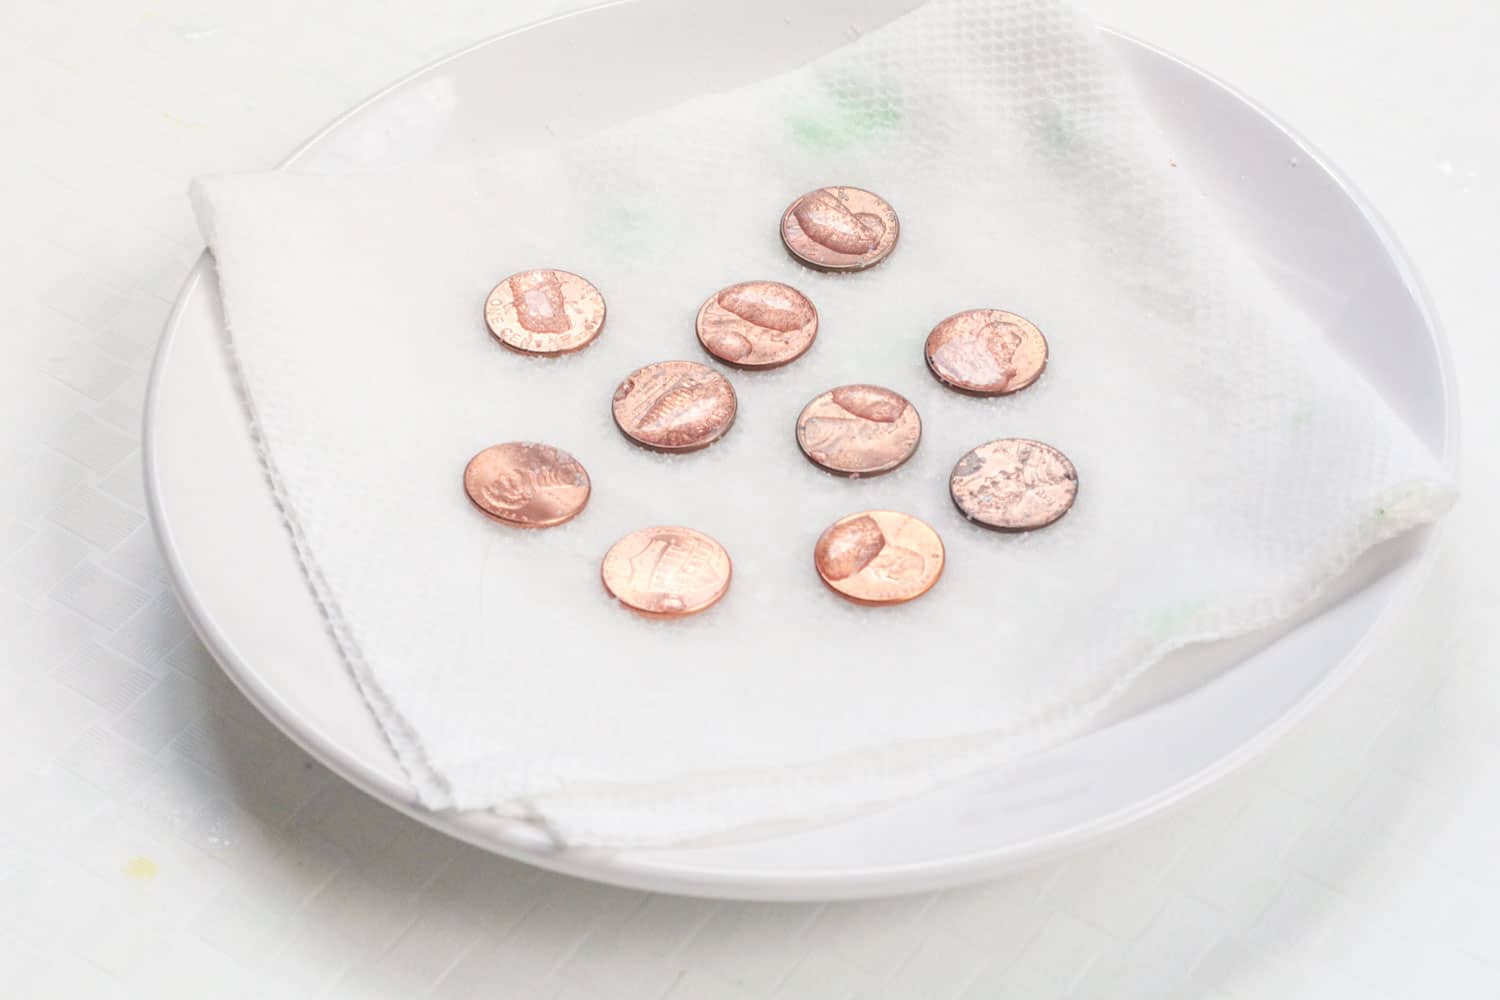 Want an easy and educational activity? Turning a penny green is a fun science experiment that kids of all ages enjoy! Turning pennies green is a classic science activity where kids learn how to oxidize a penny quickly. 